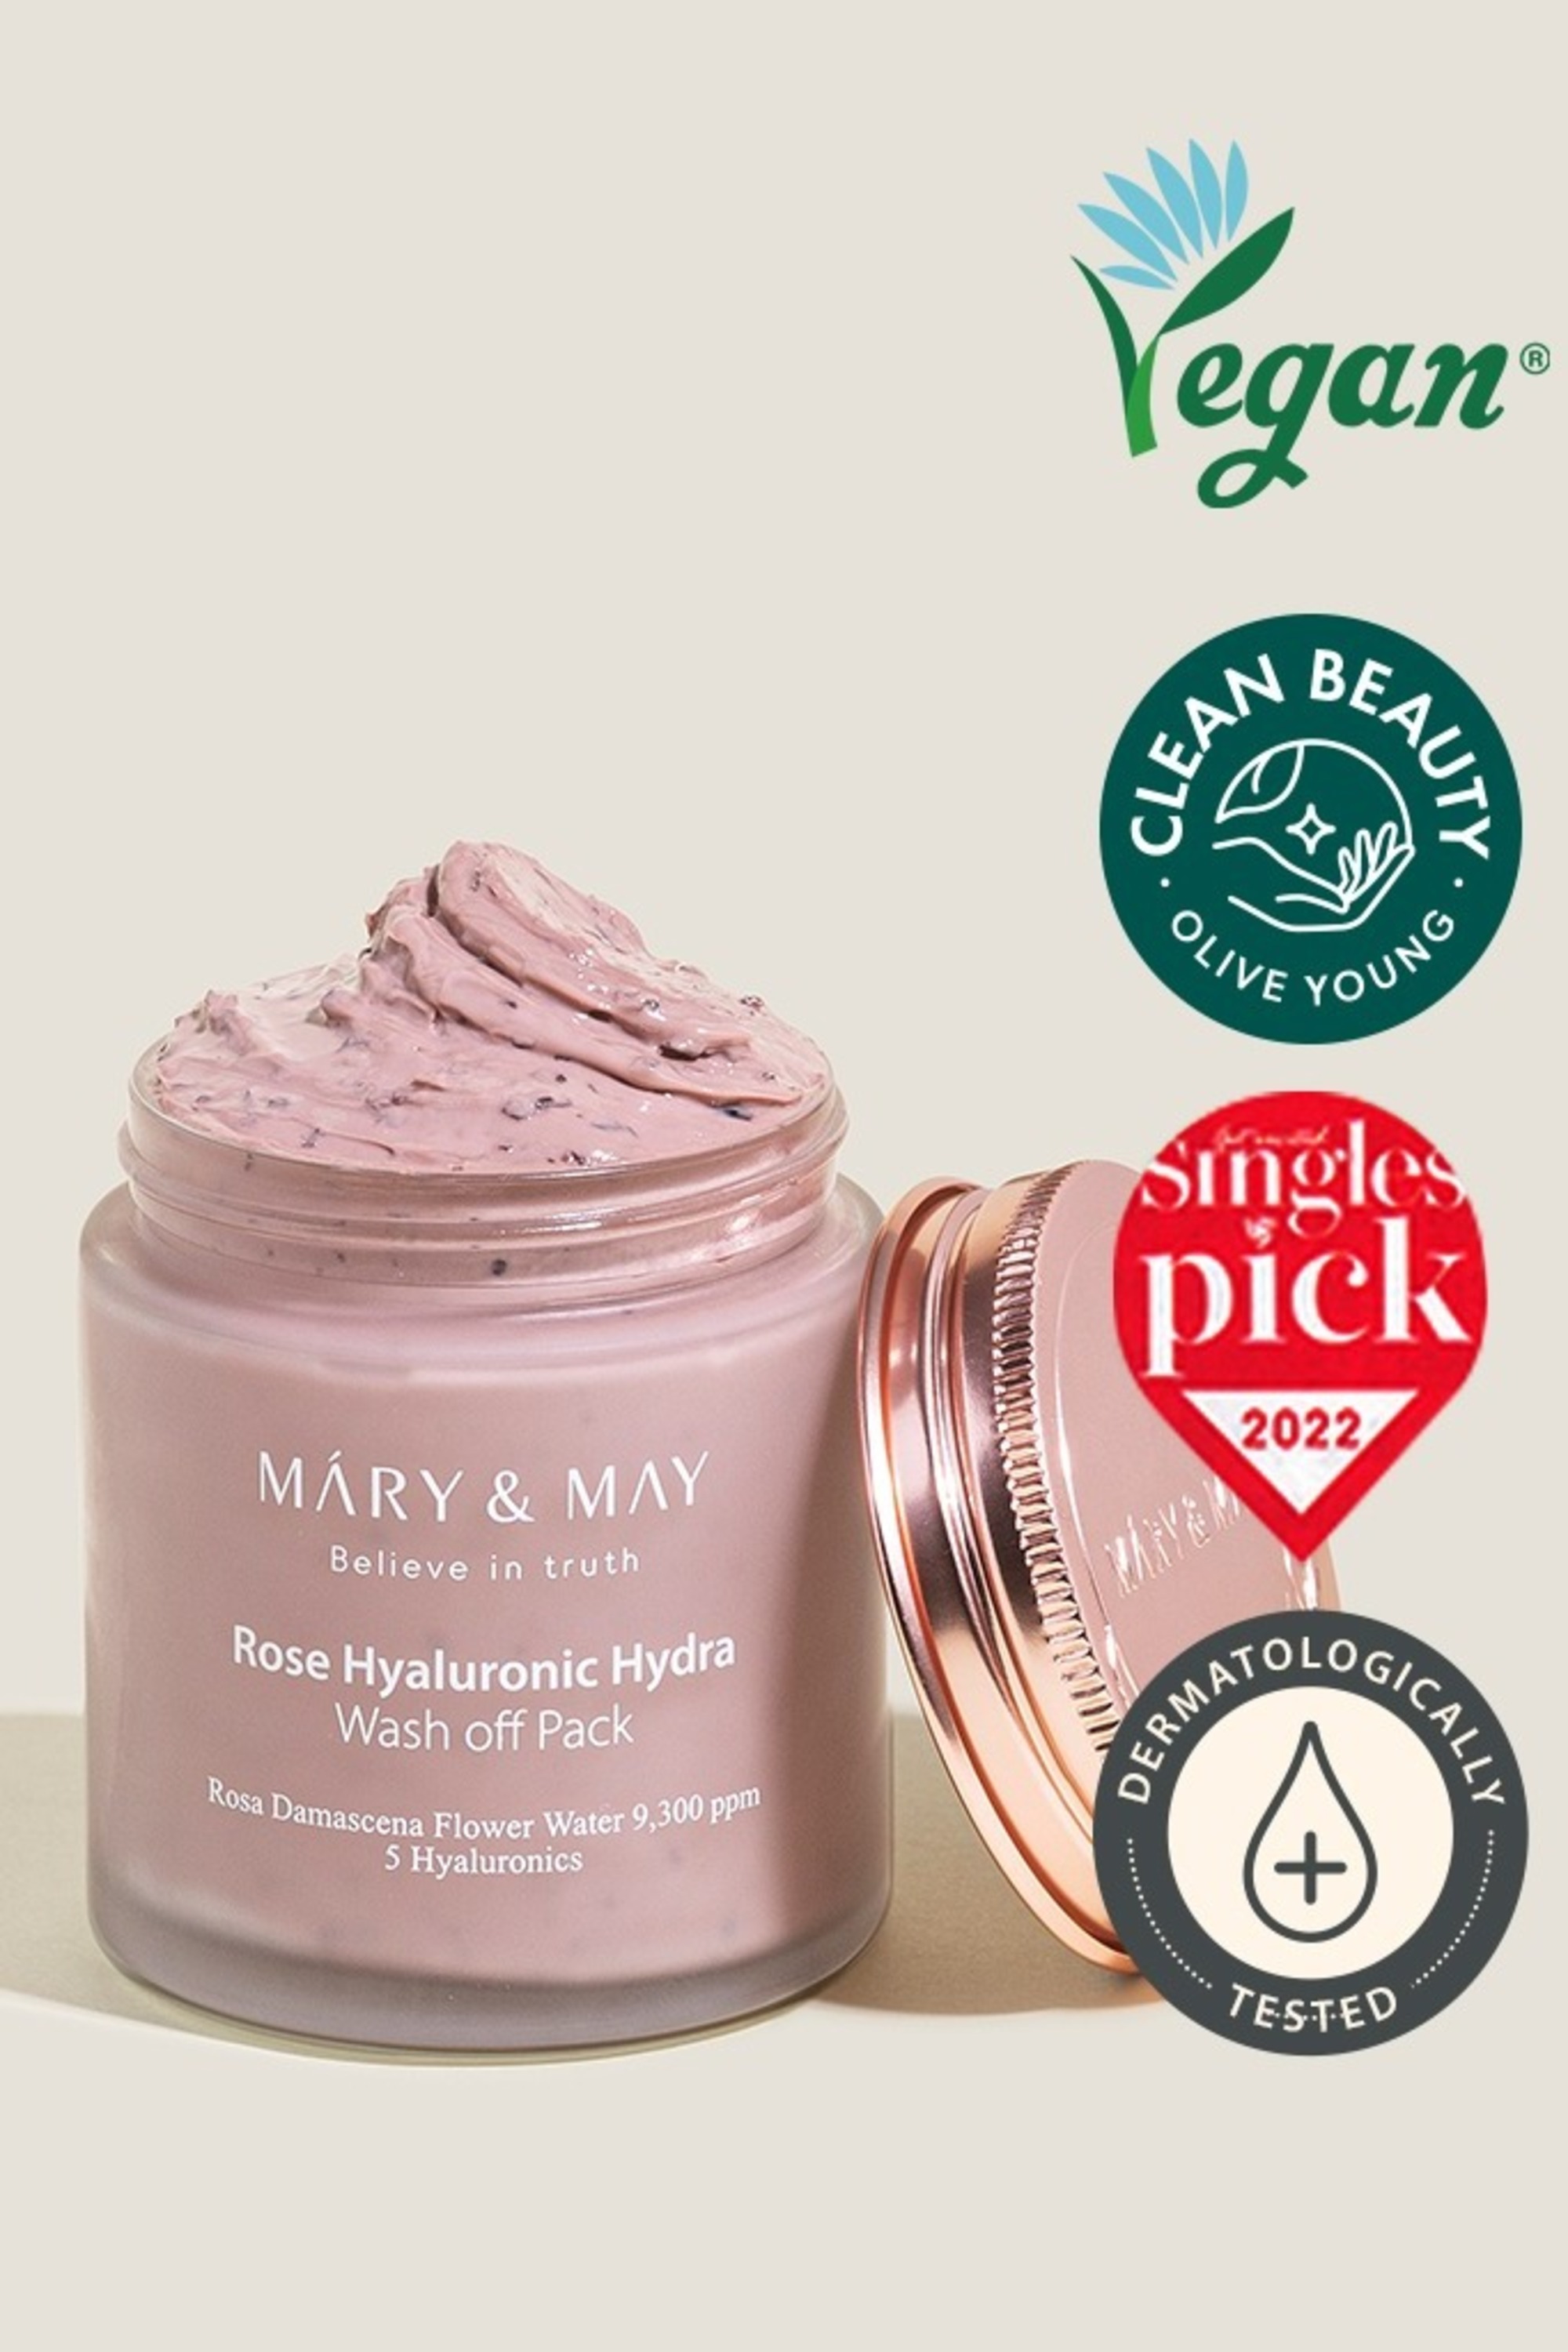  Mary&May Rose Hyaluronic Hydra Glo..